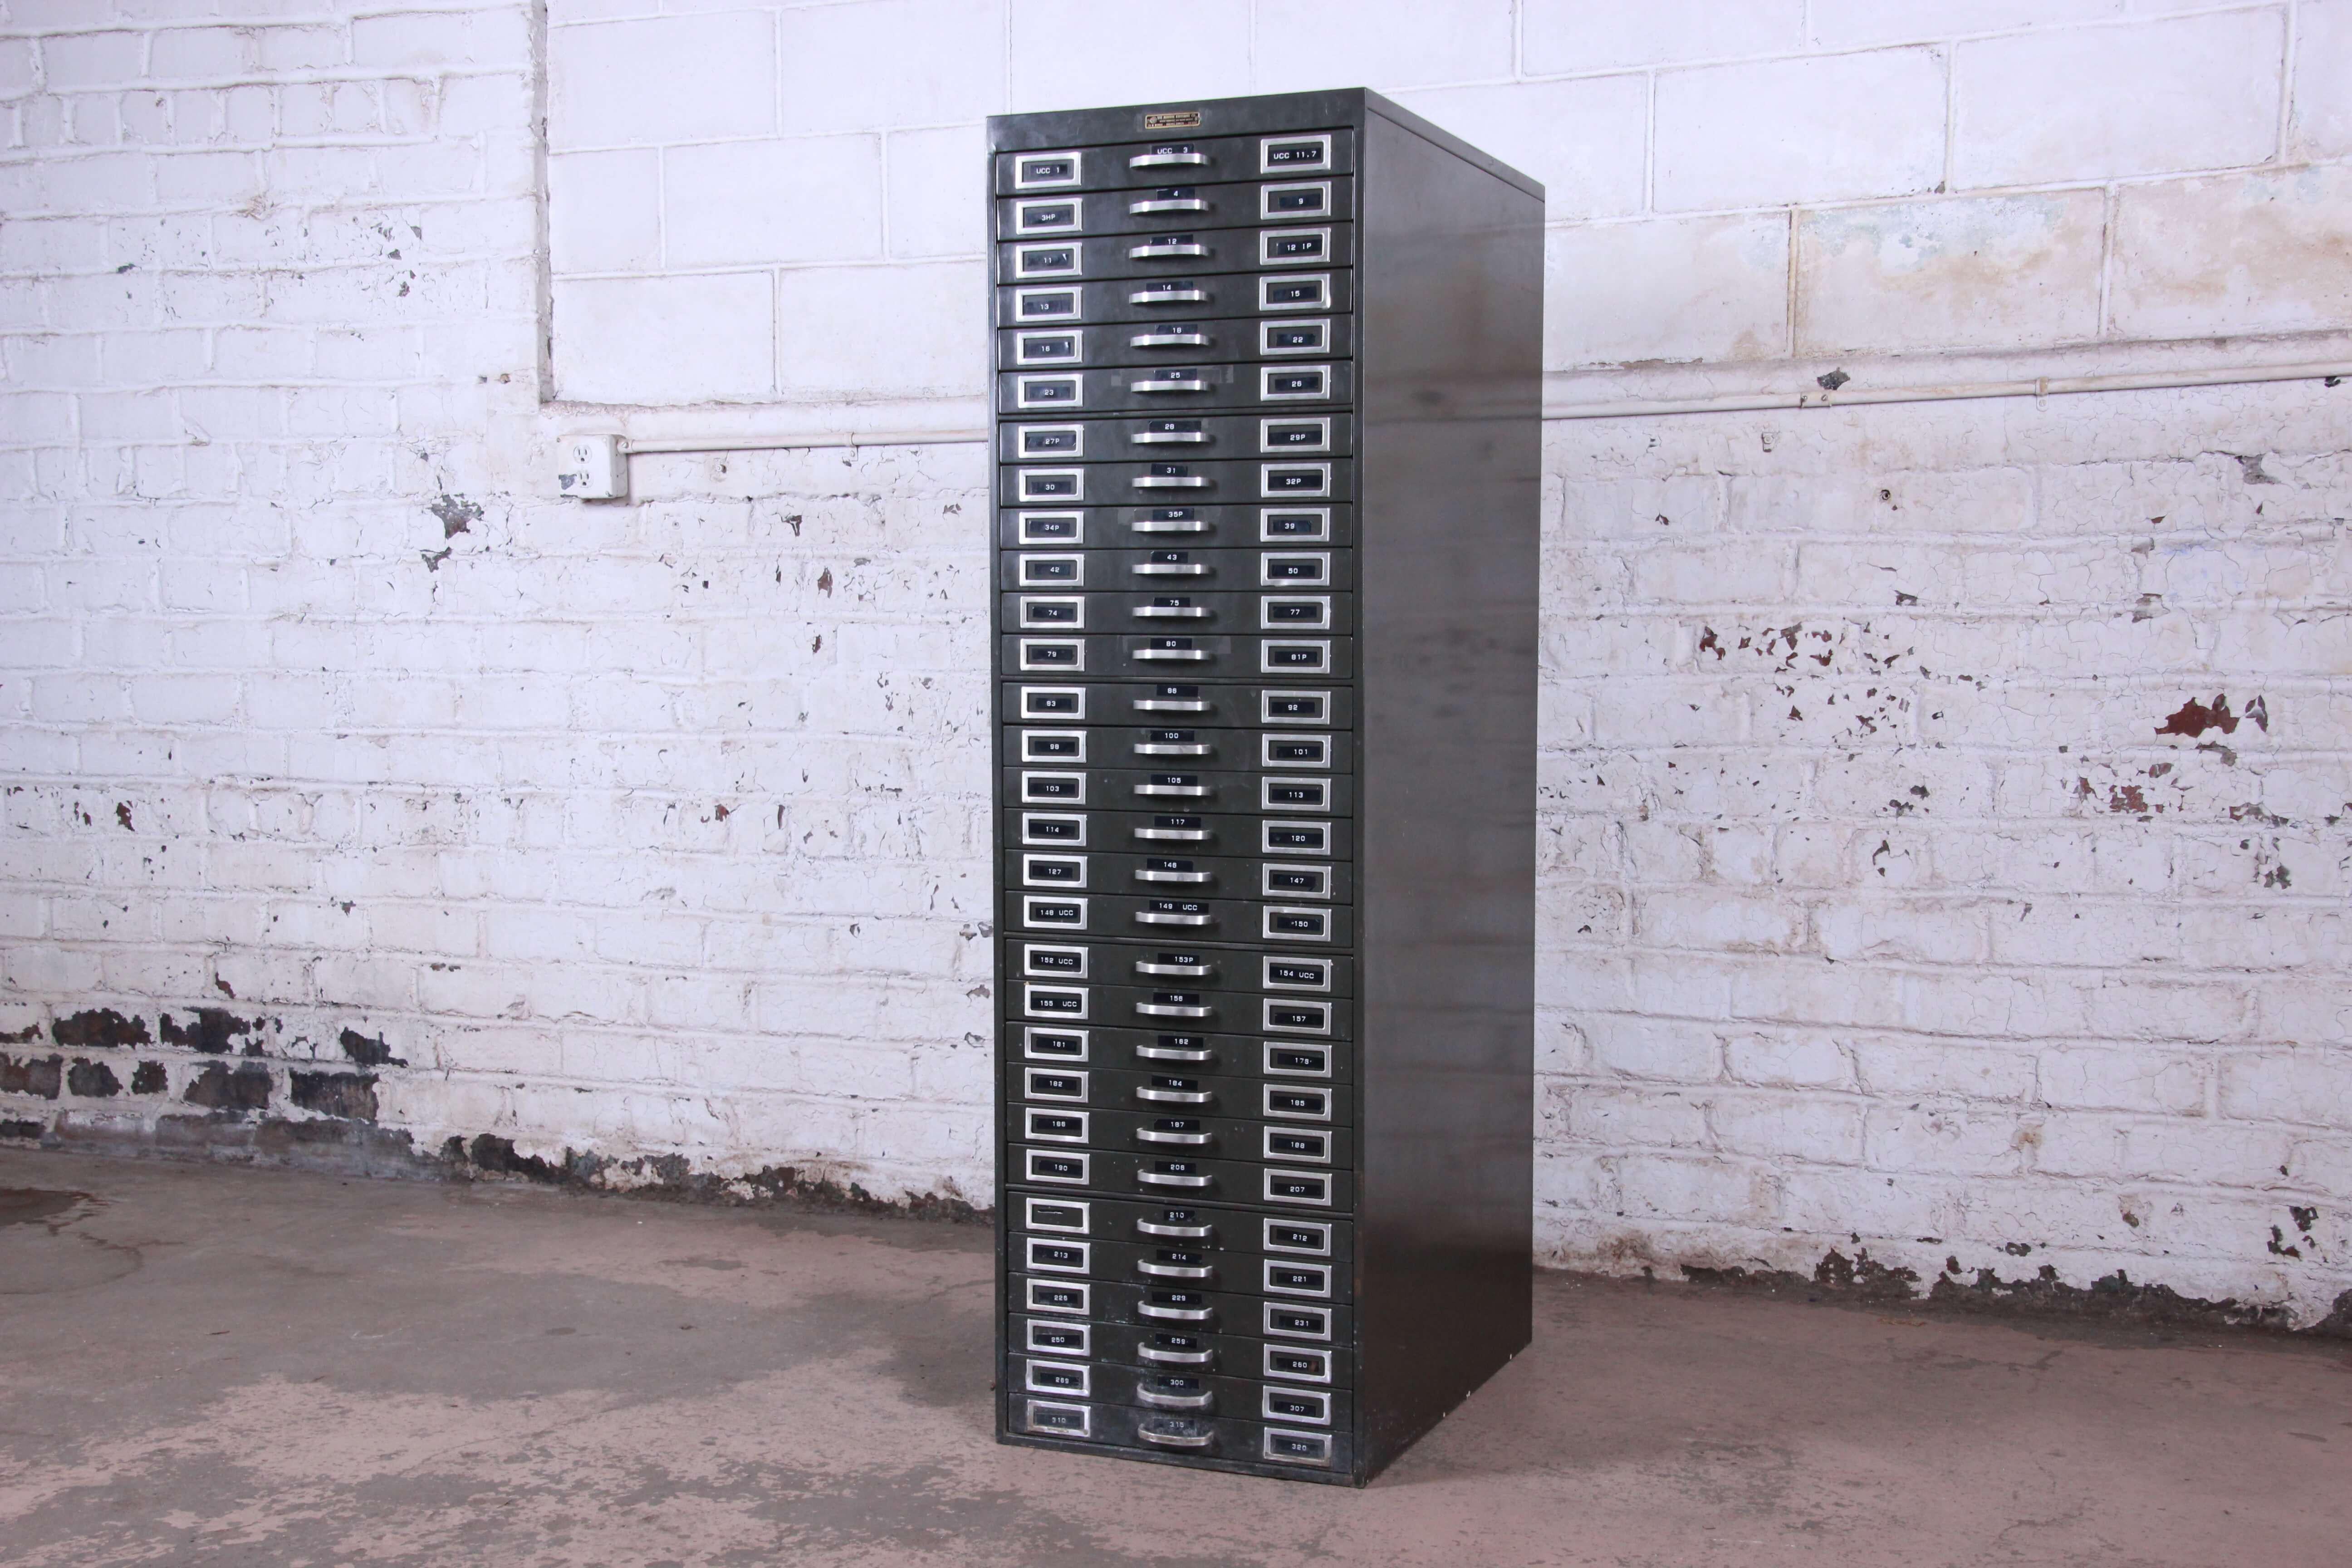 Offering a unique vintage industrial 30-drawer metal flat file from the Monroe Furniture Co in Chicago. The cabinet is made from a heavy gauge steel and offer thirty smooth sliding drawers for ample storage and organization. The cabinet is in good